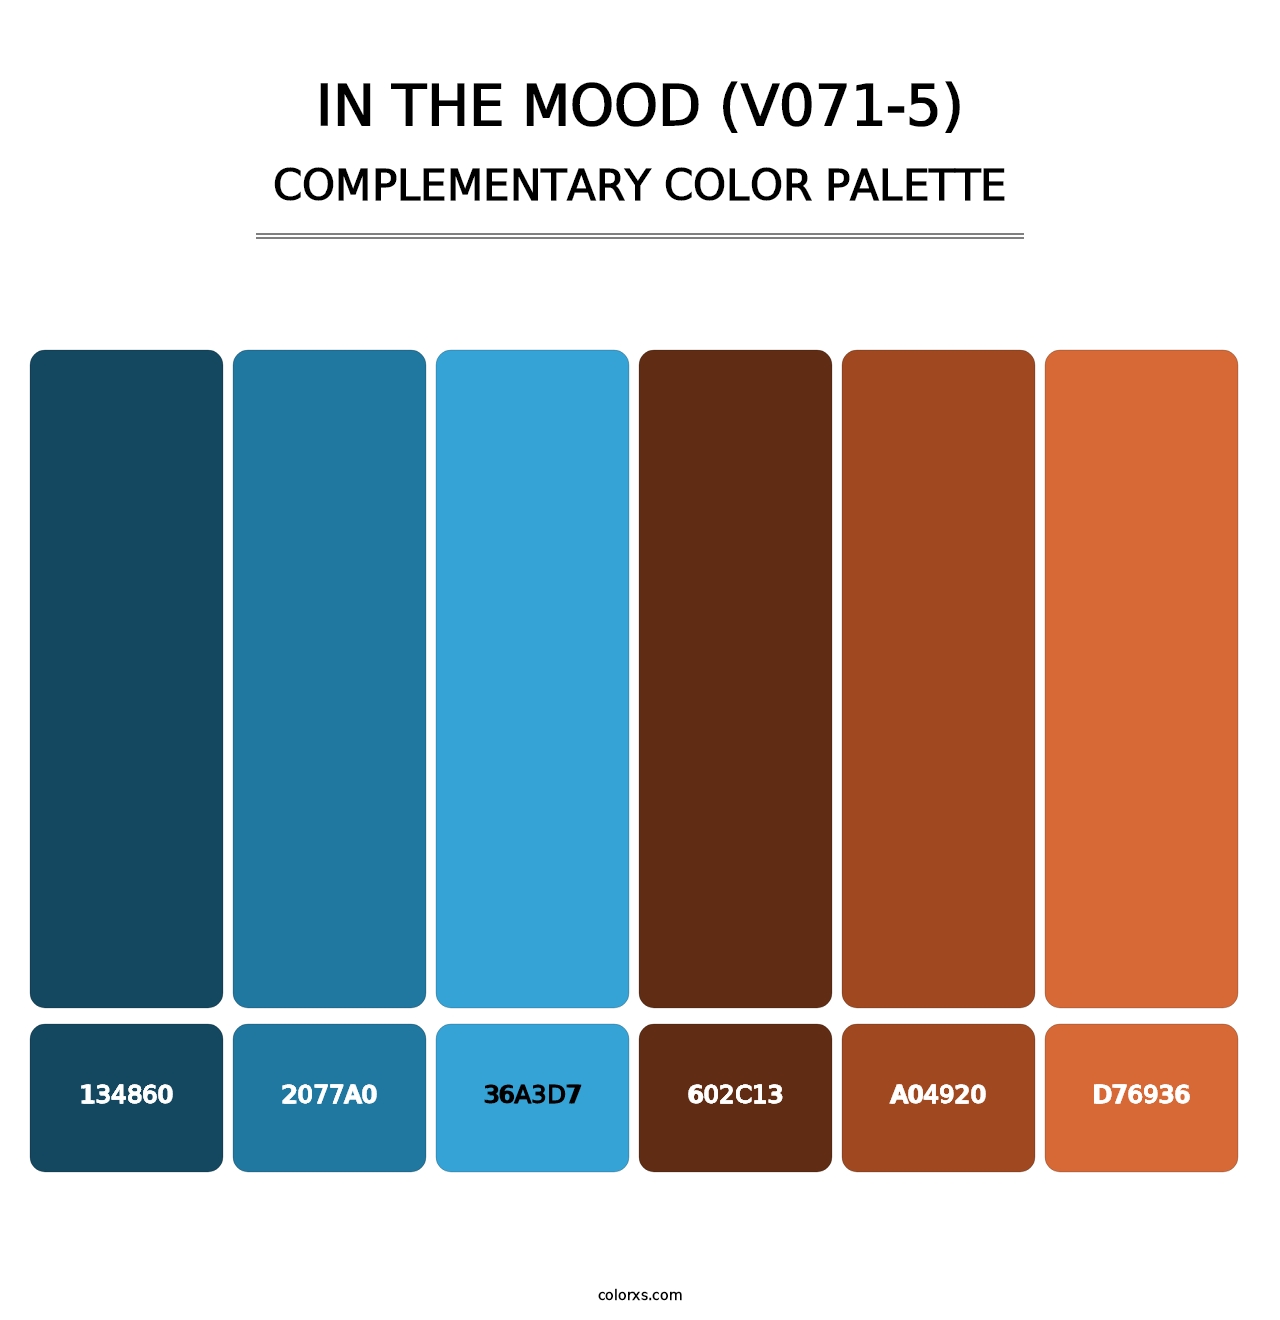 In the Mood (V071-5) - Complementary Color Palette